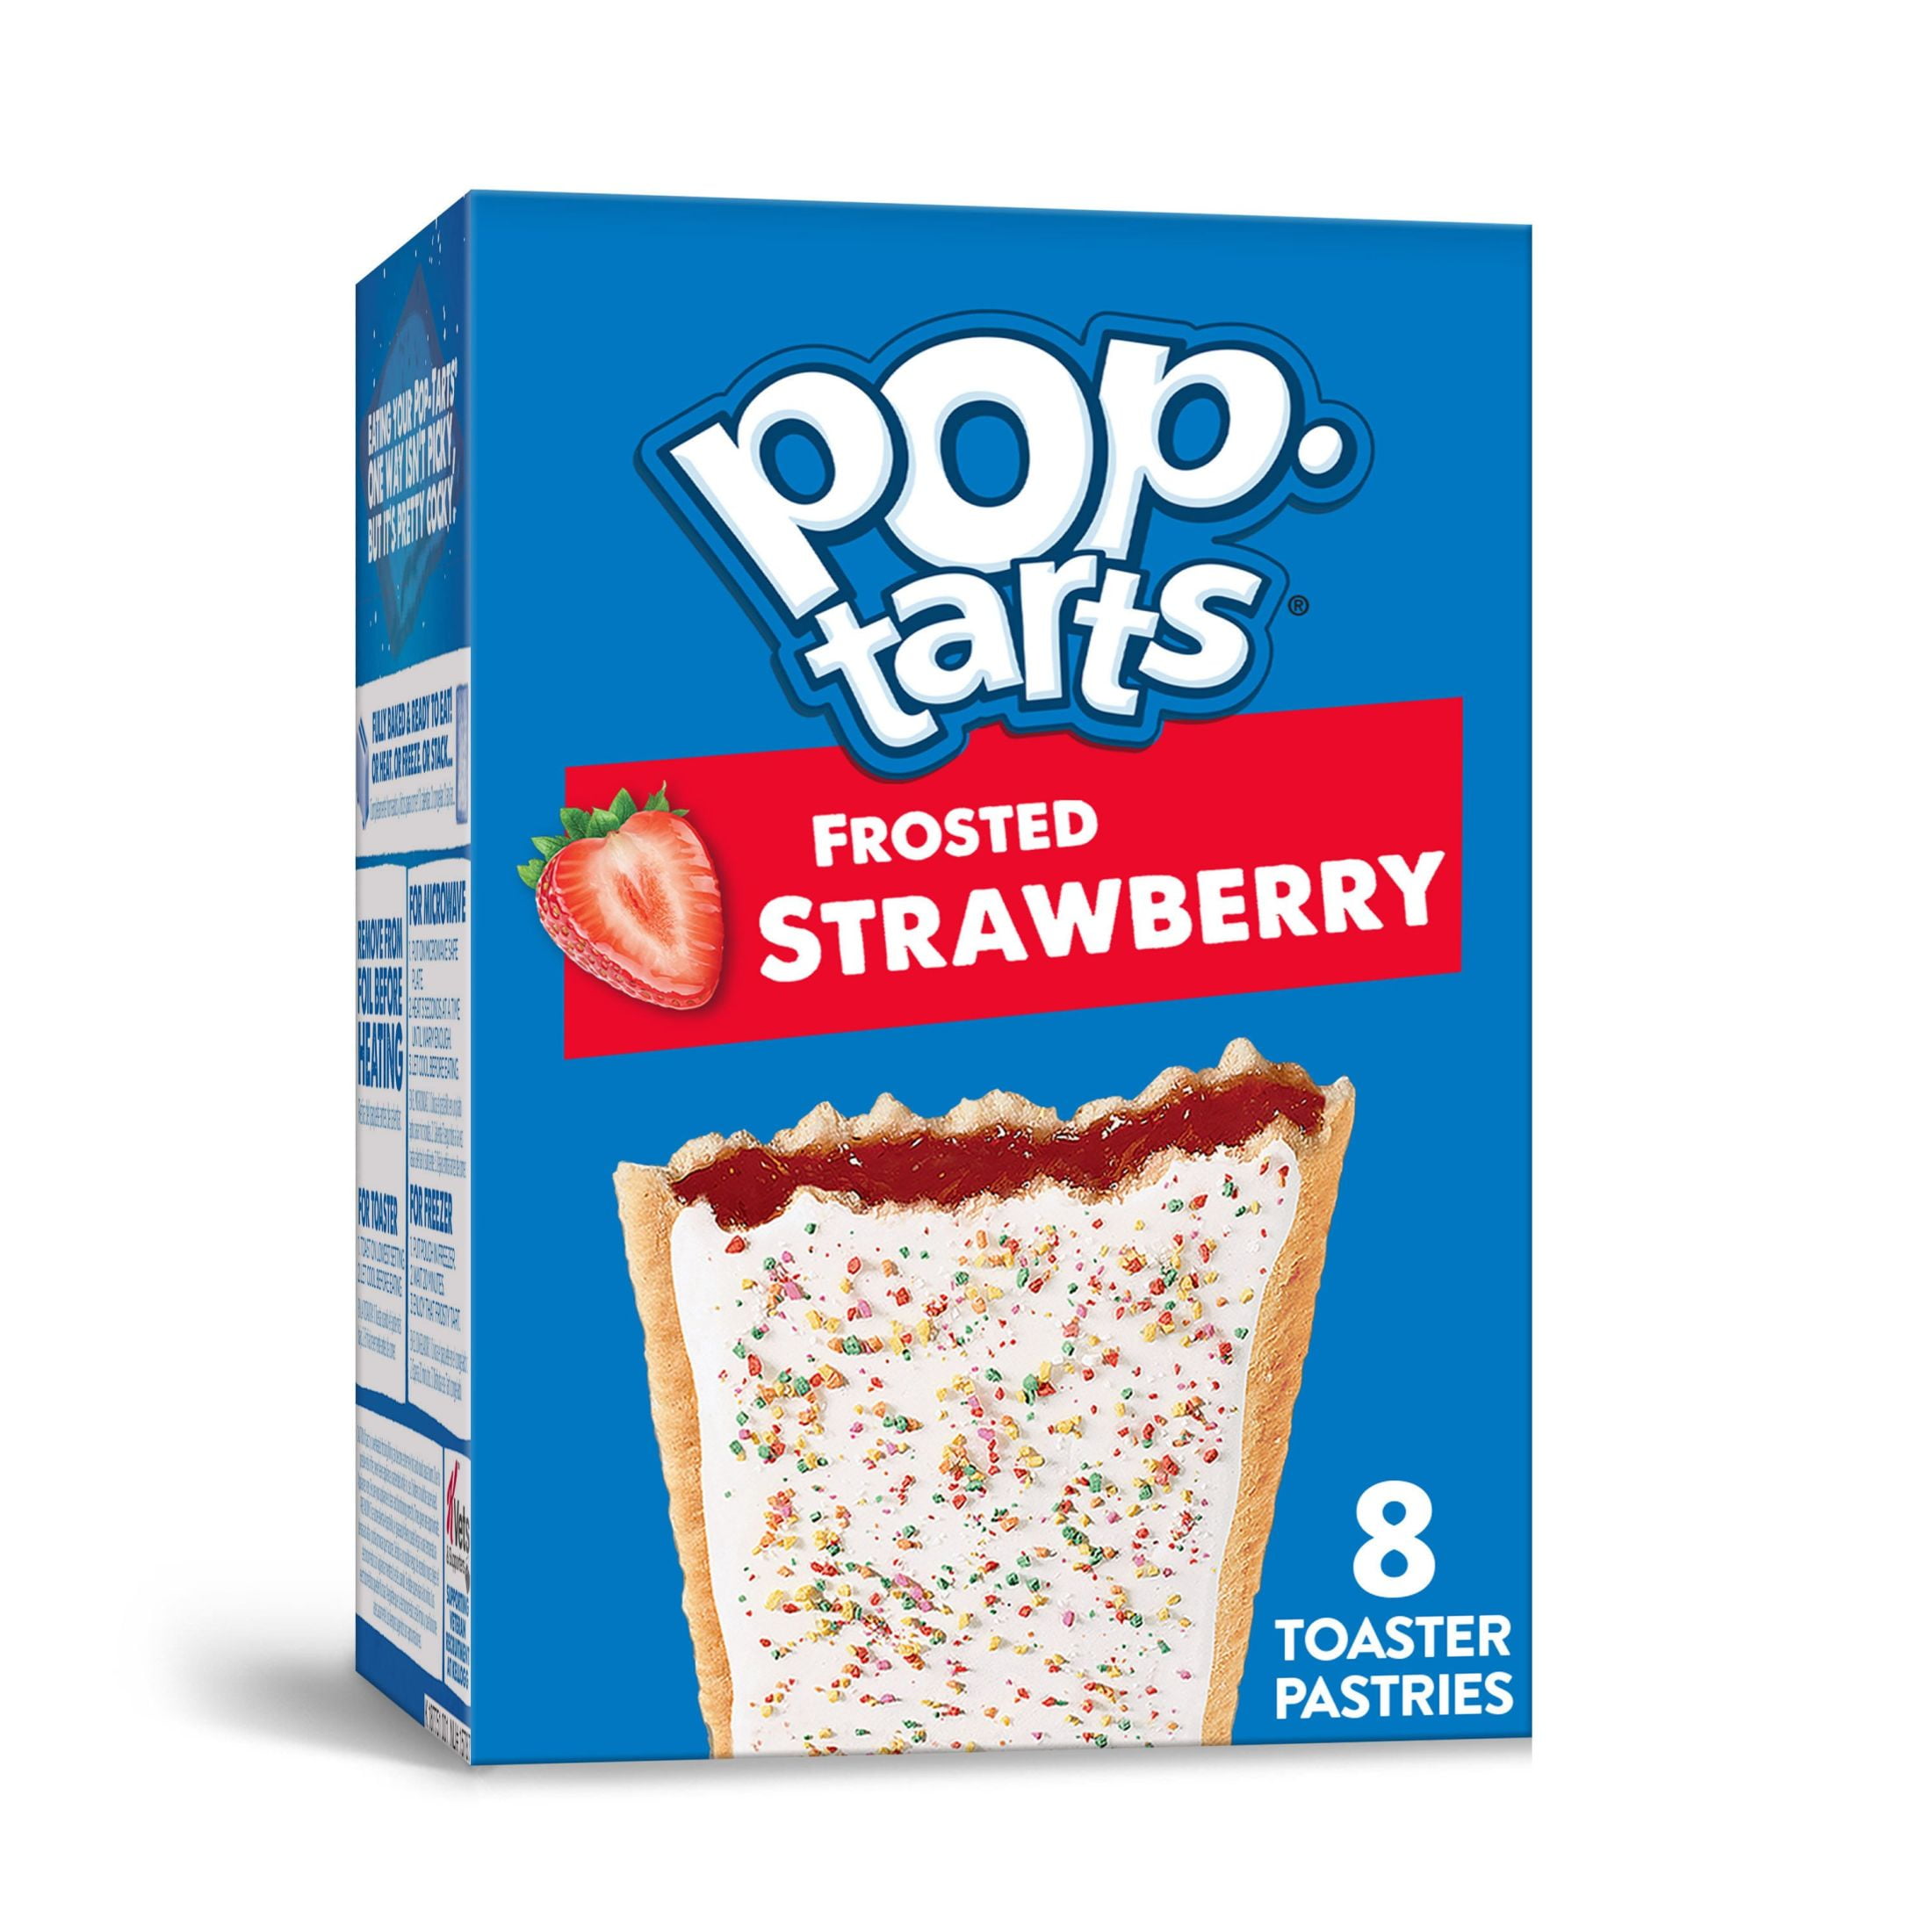 Pop-Tarts Frosted Strawberry Breakfast Toaster Pastries,13.5 oz, 8 Count